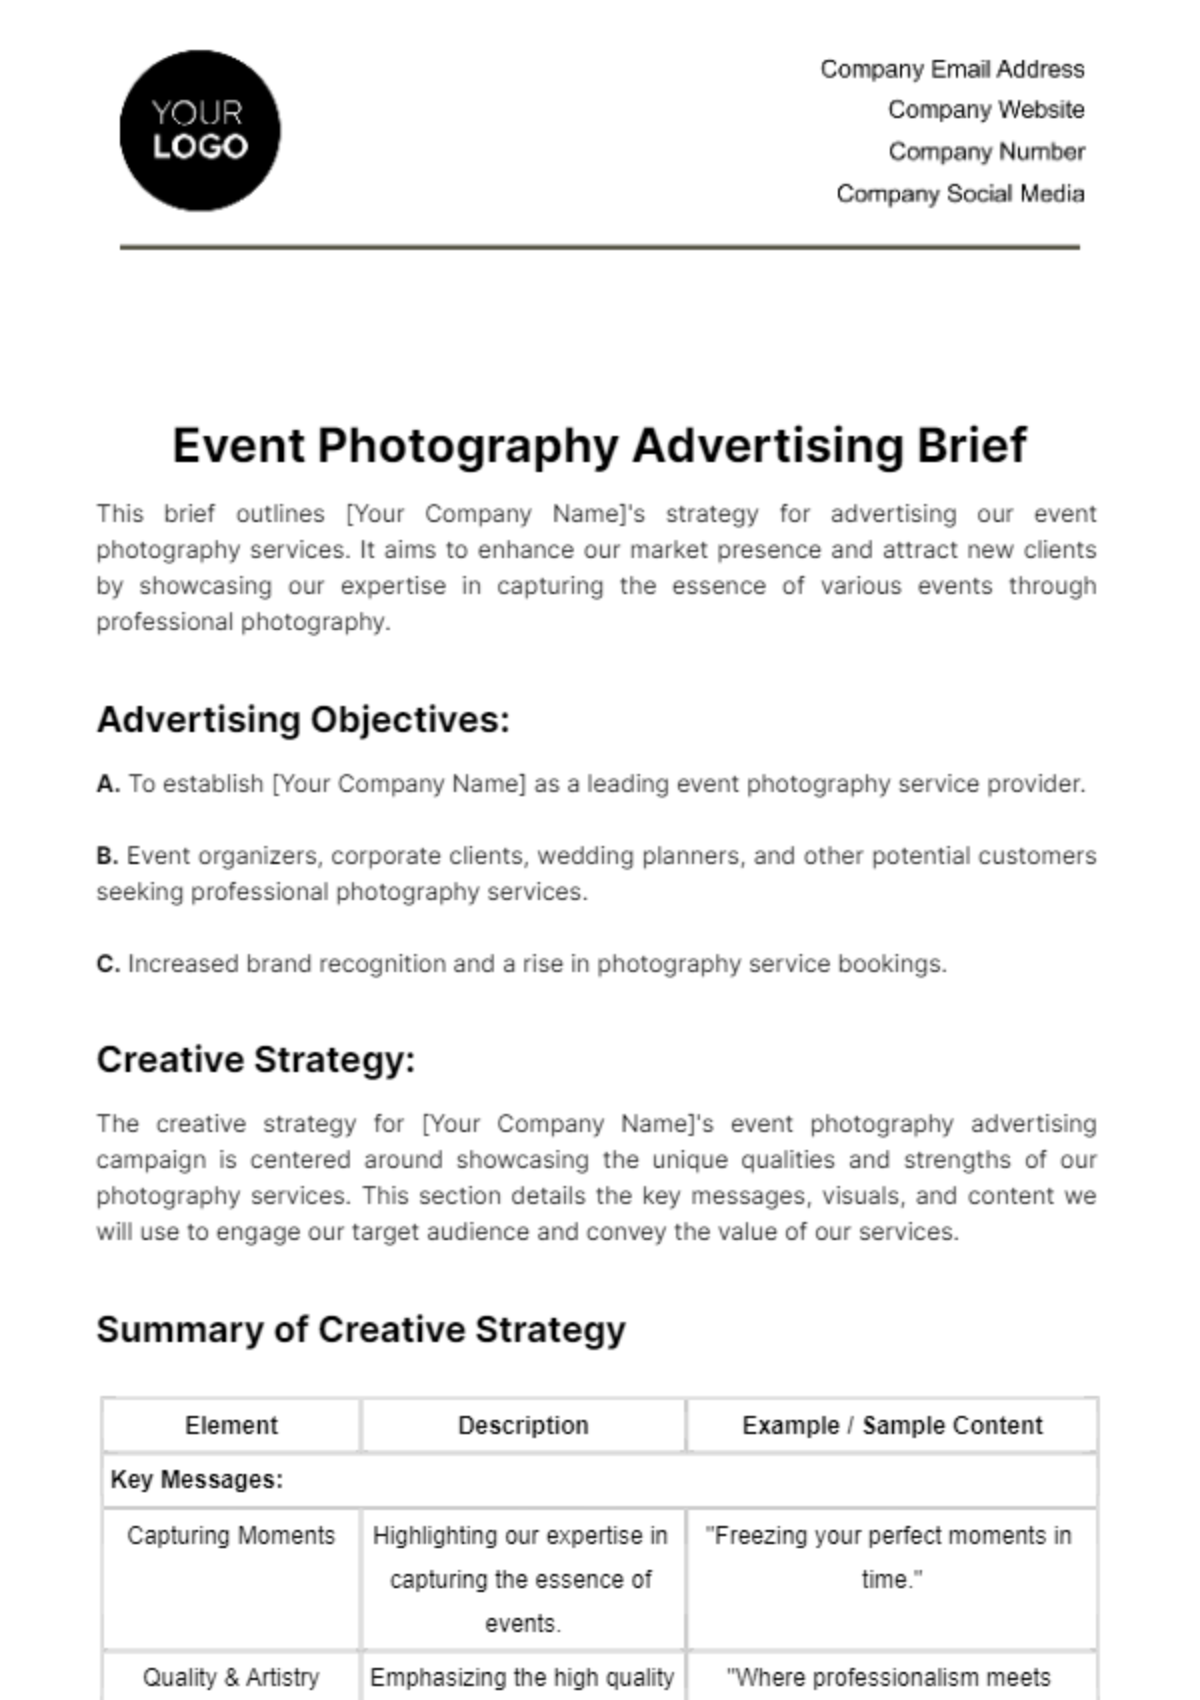 Free Event Photography Advertising Brief Template